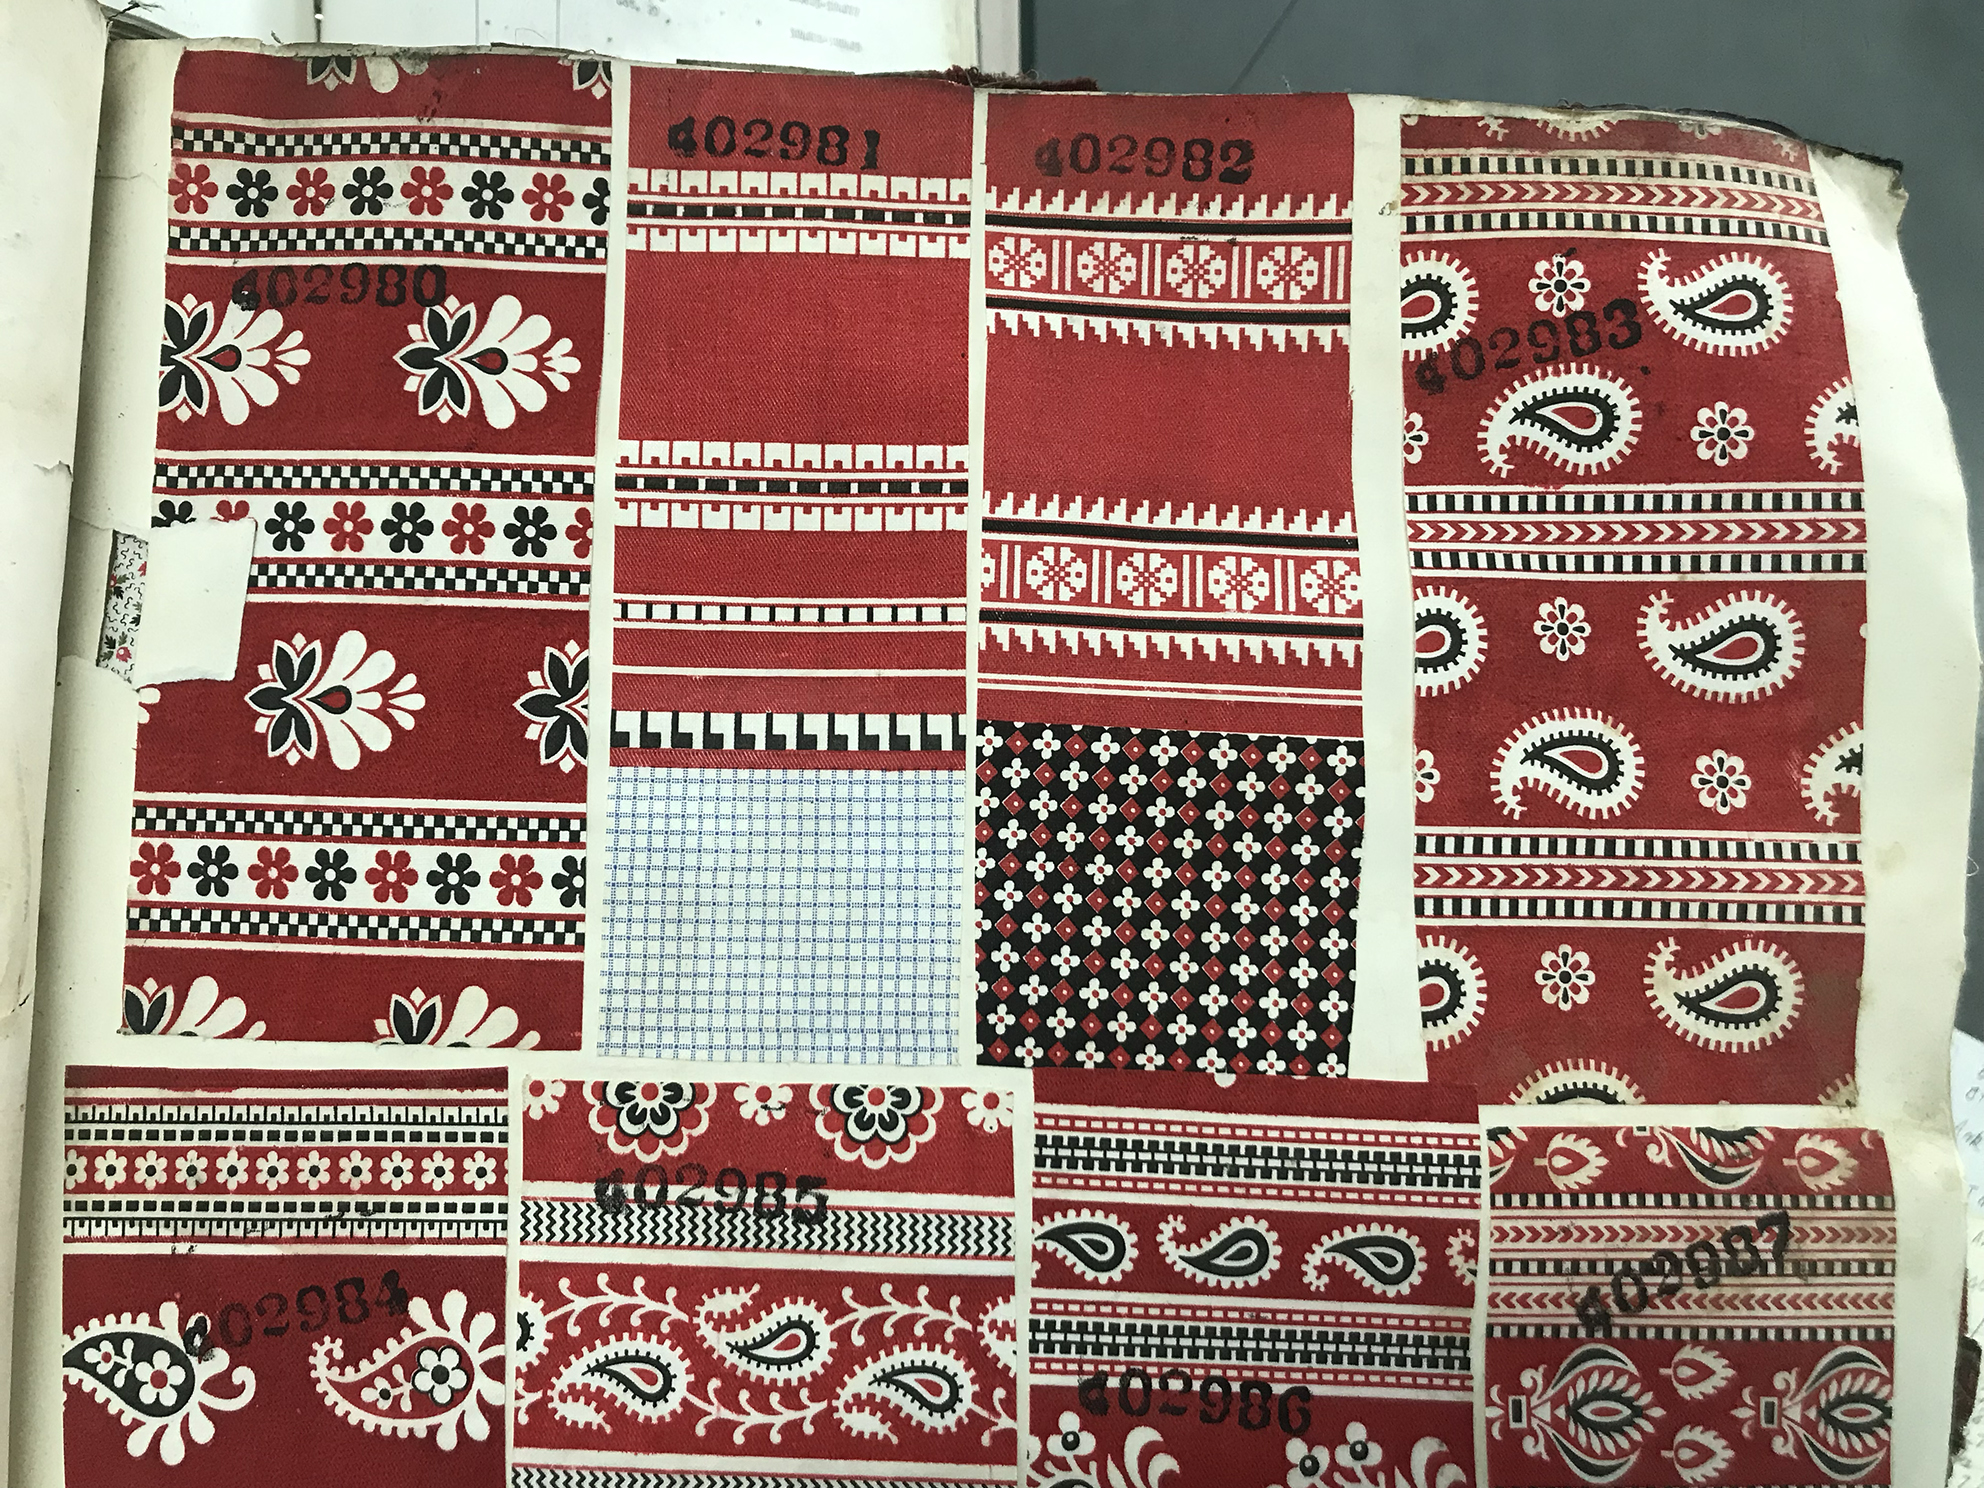 Image of red patterned textiles